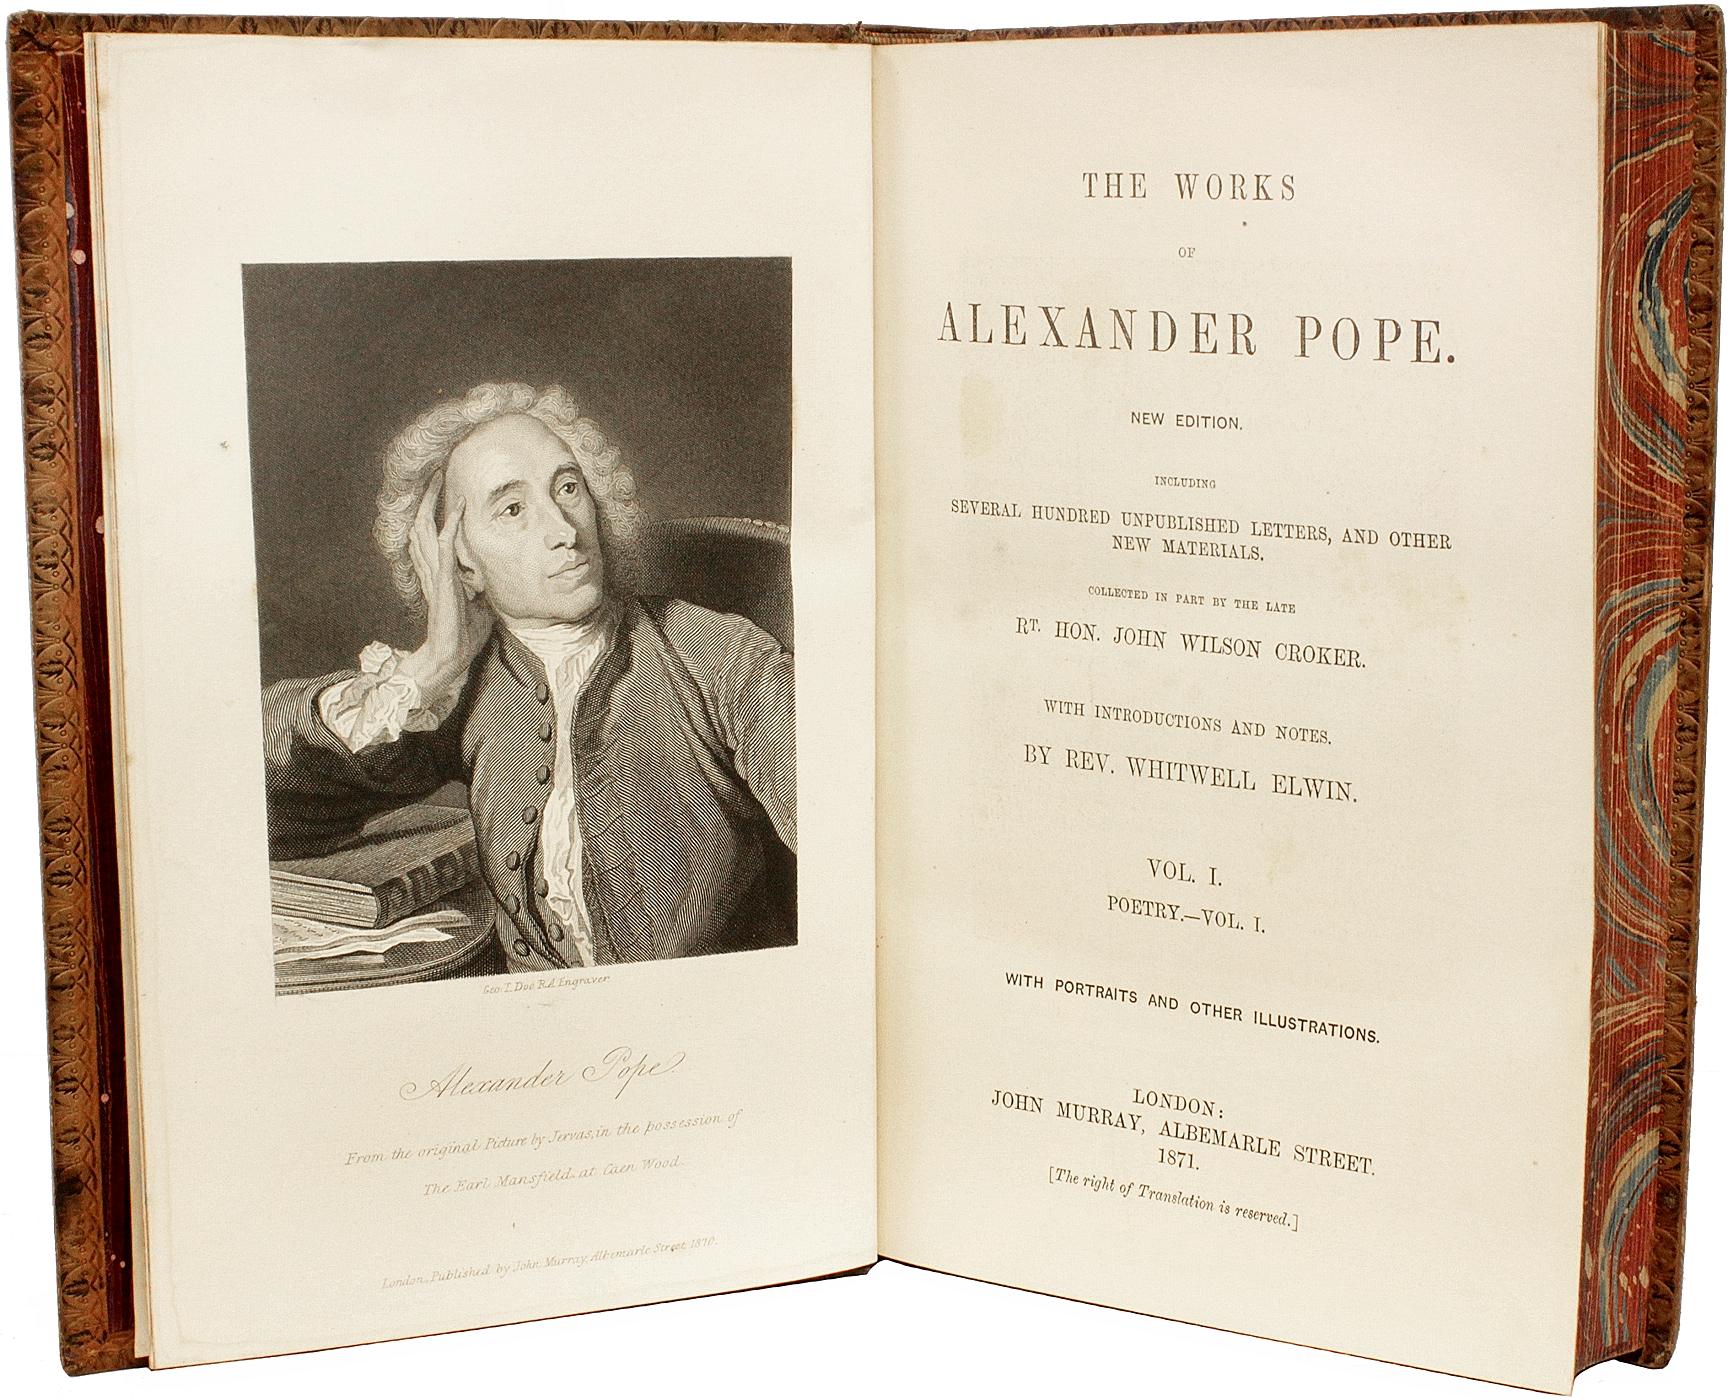 Late 19th Century The Works Of Alexander Pope. 10 VOLUMES - NEW EDITION - 1871 - IN FULL TAN CALF For Sale